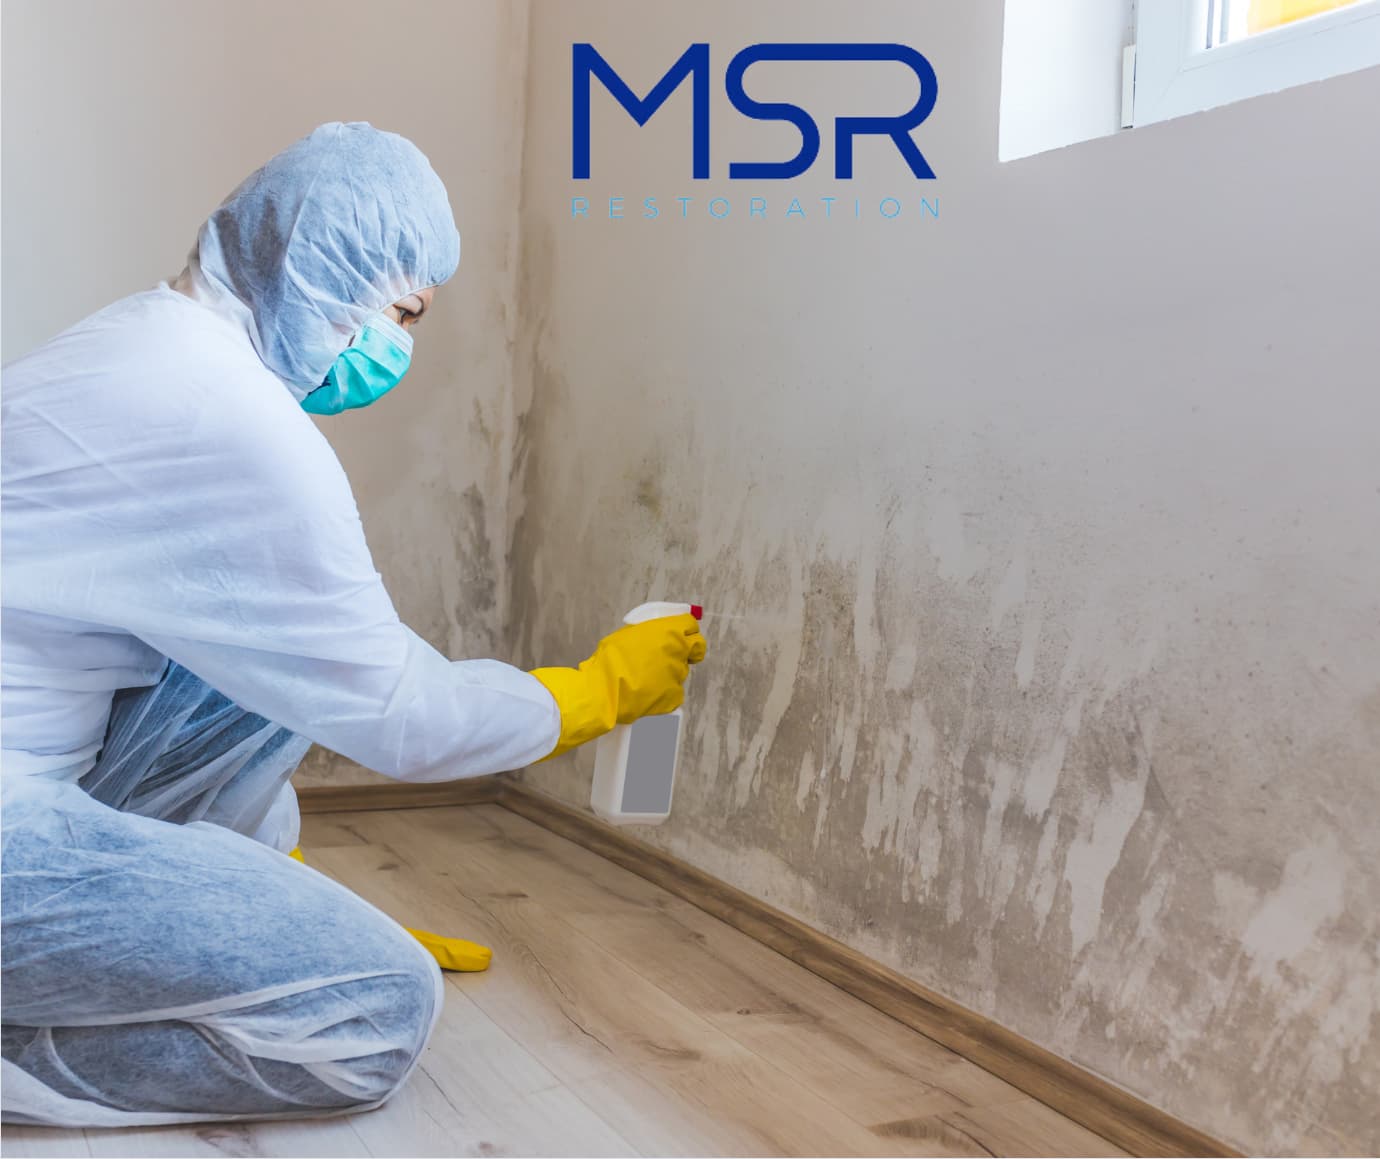 MSR Restoration offers Mold Cleaning Services